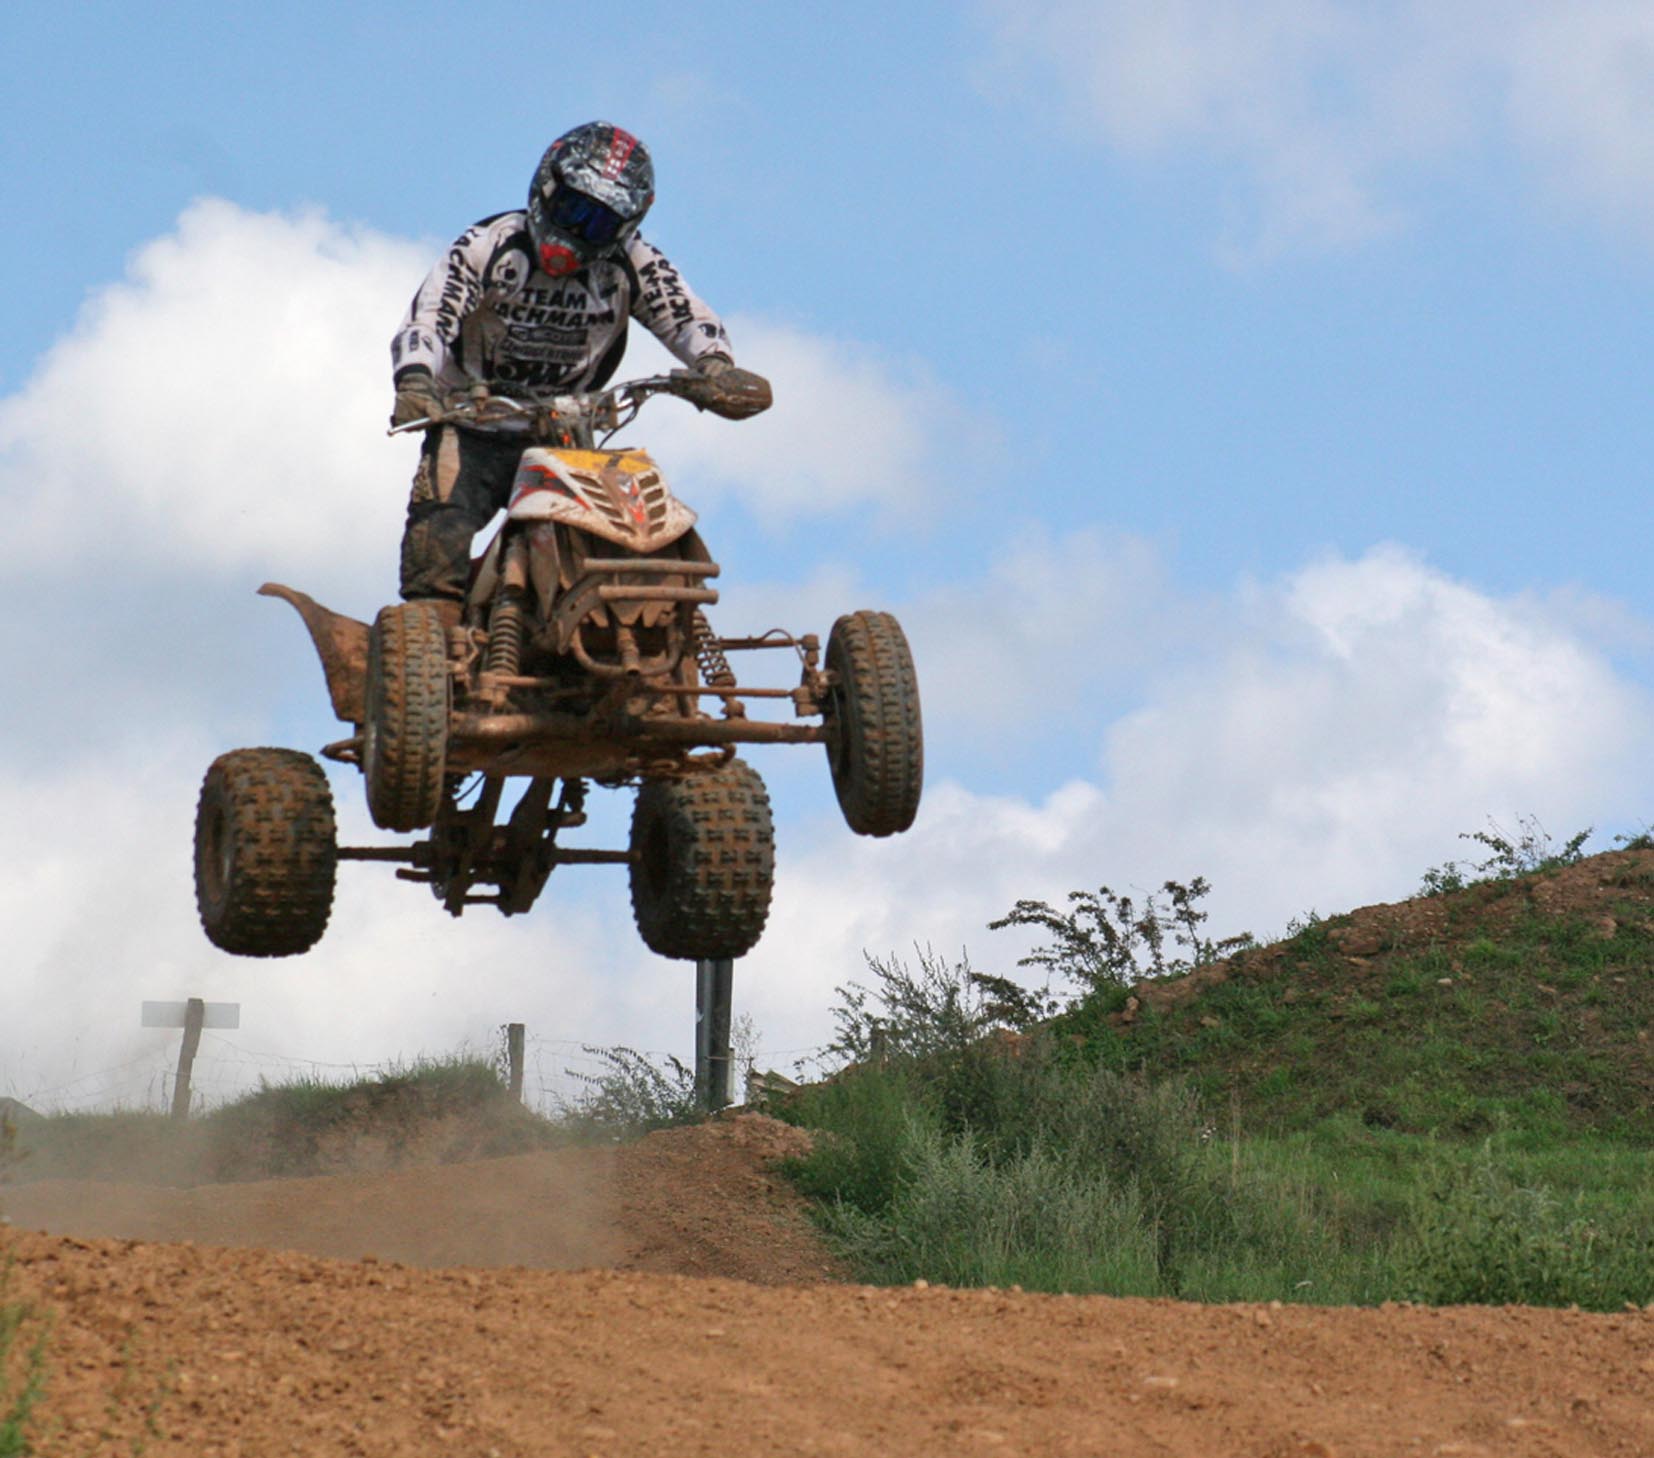 Yannick loves to ride a quad. This is what it looks like a few years later.